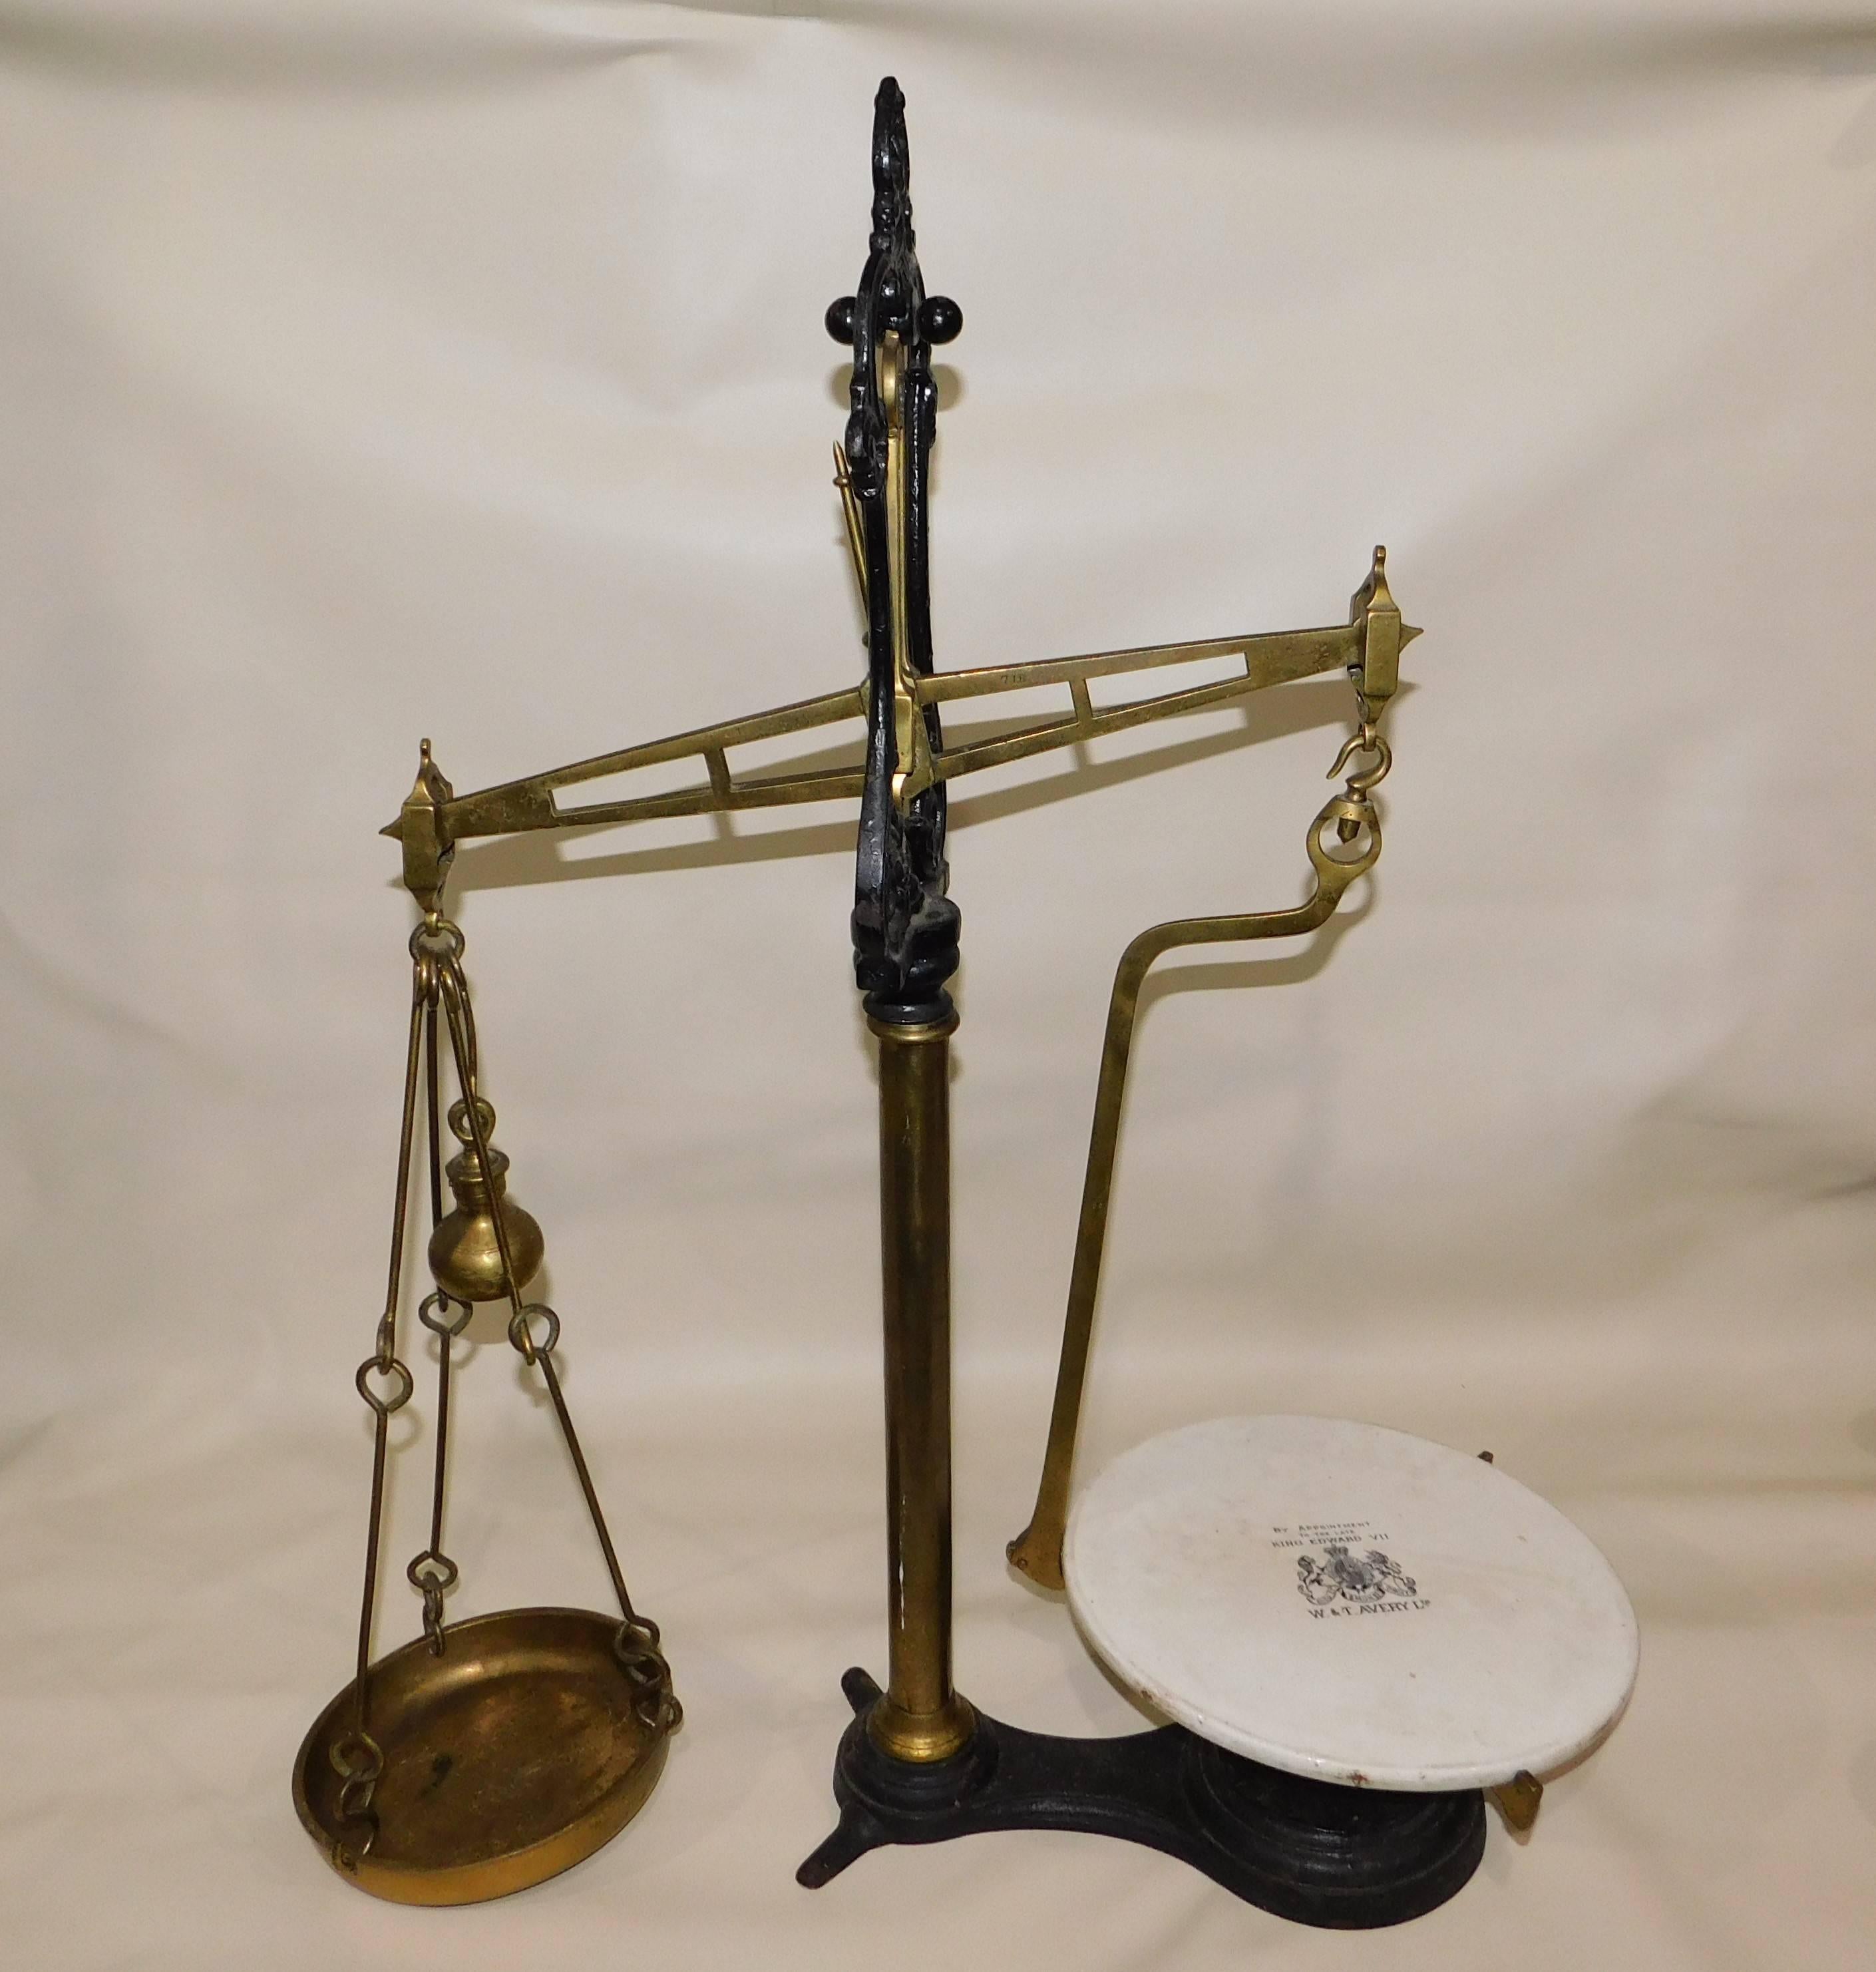 Large antique wrought iron and brass beam weight balance scale by W and T Avery Ltd. of Soho foundry Birmingham, England. Lovely black transfer on a porcelain china plate, by appointment by the late King Edward VII.